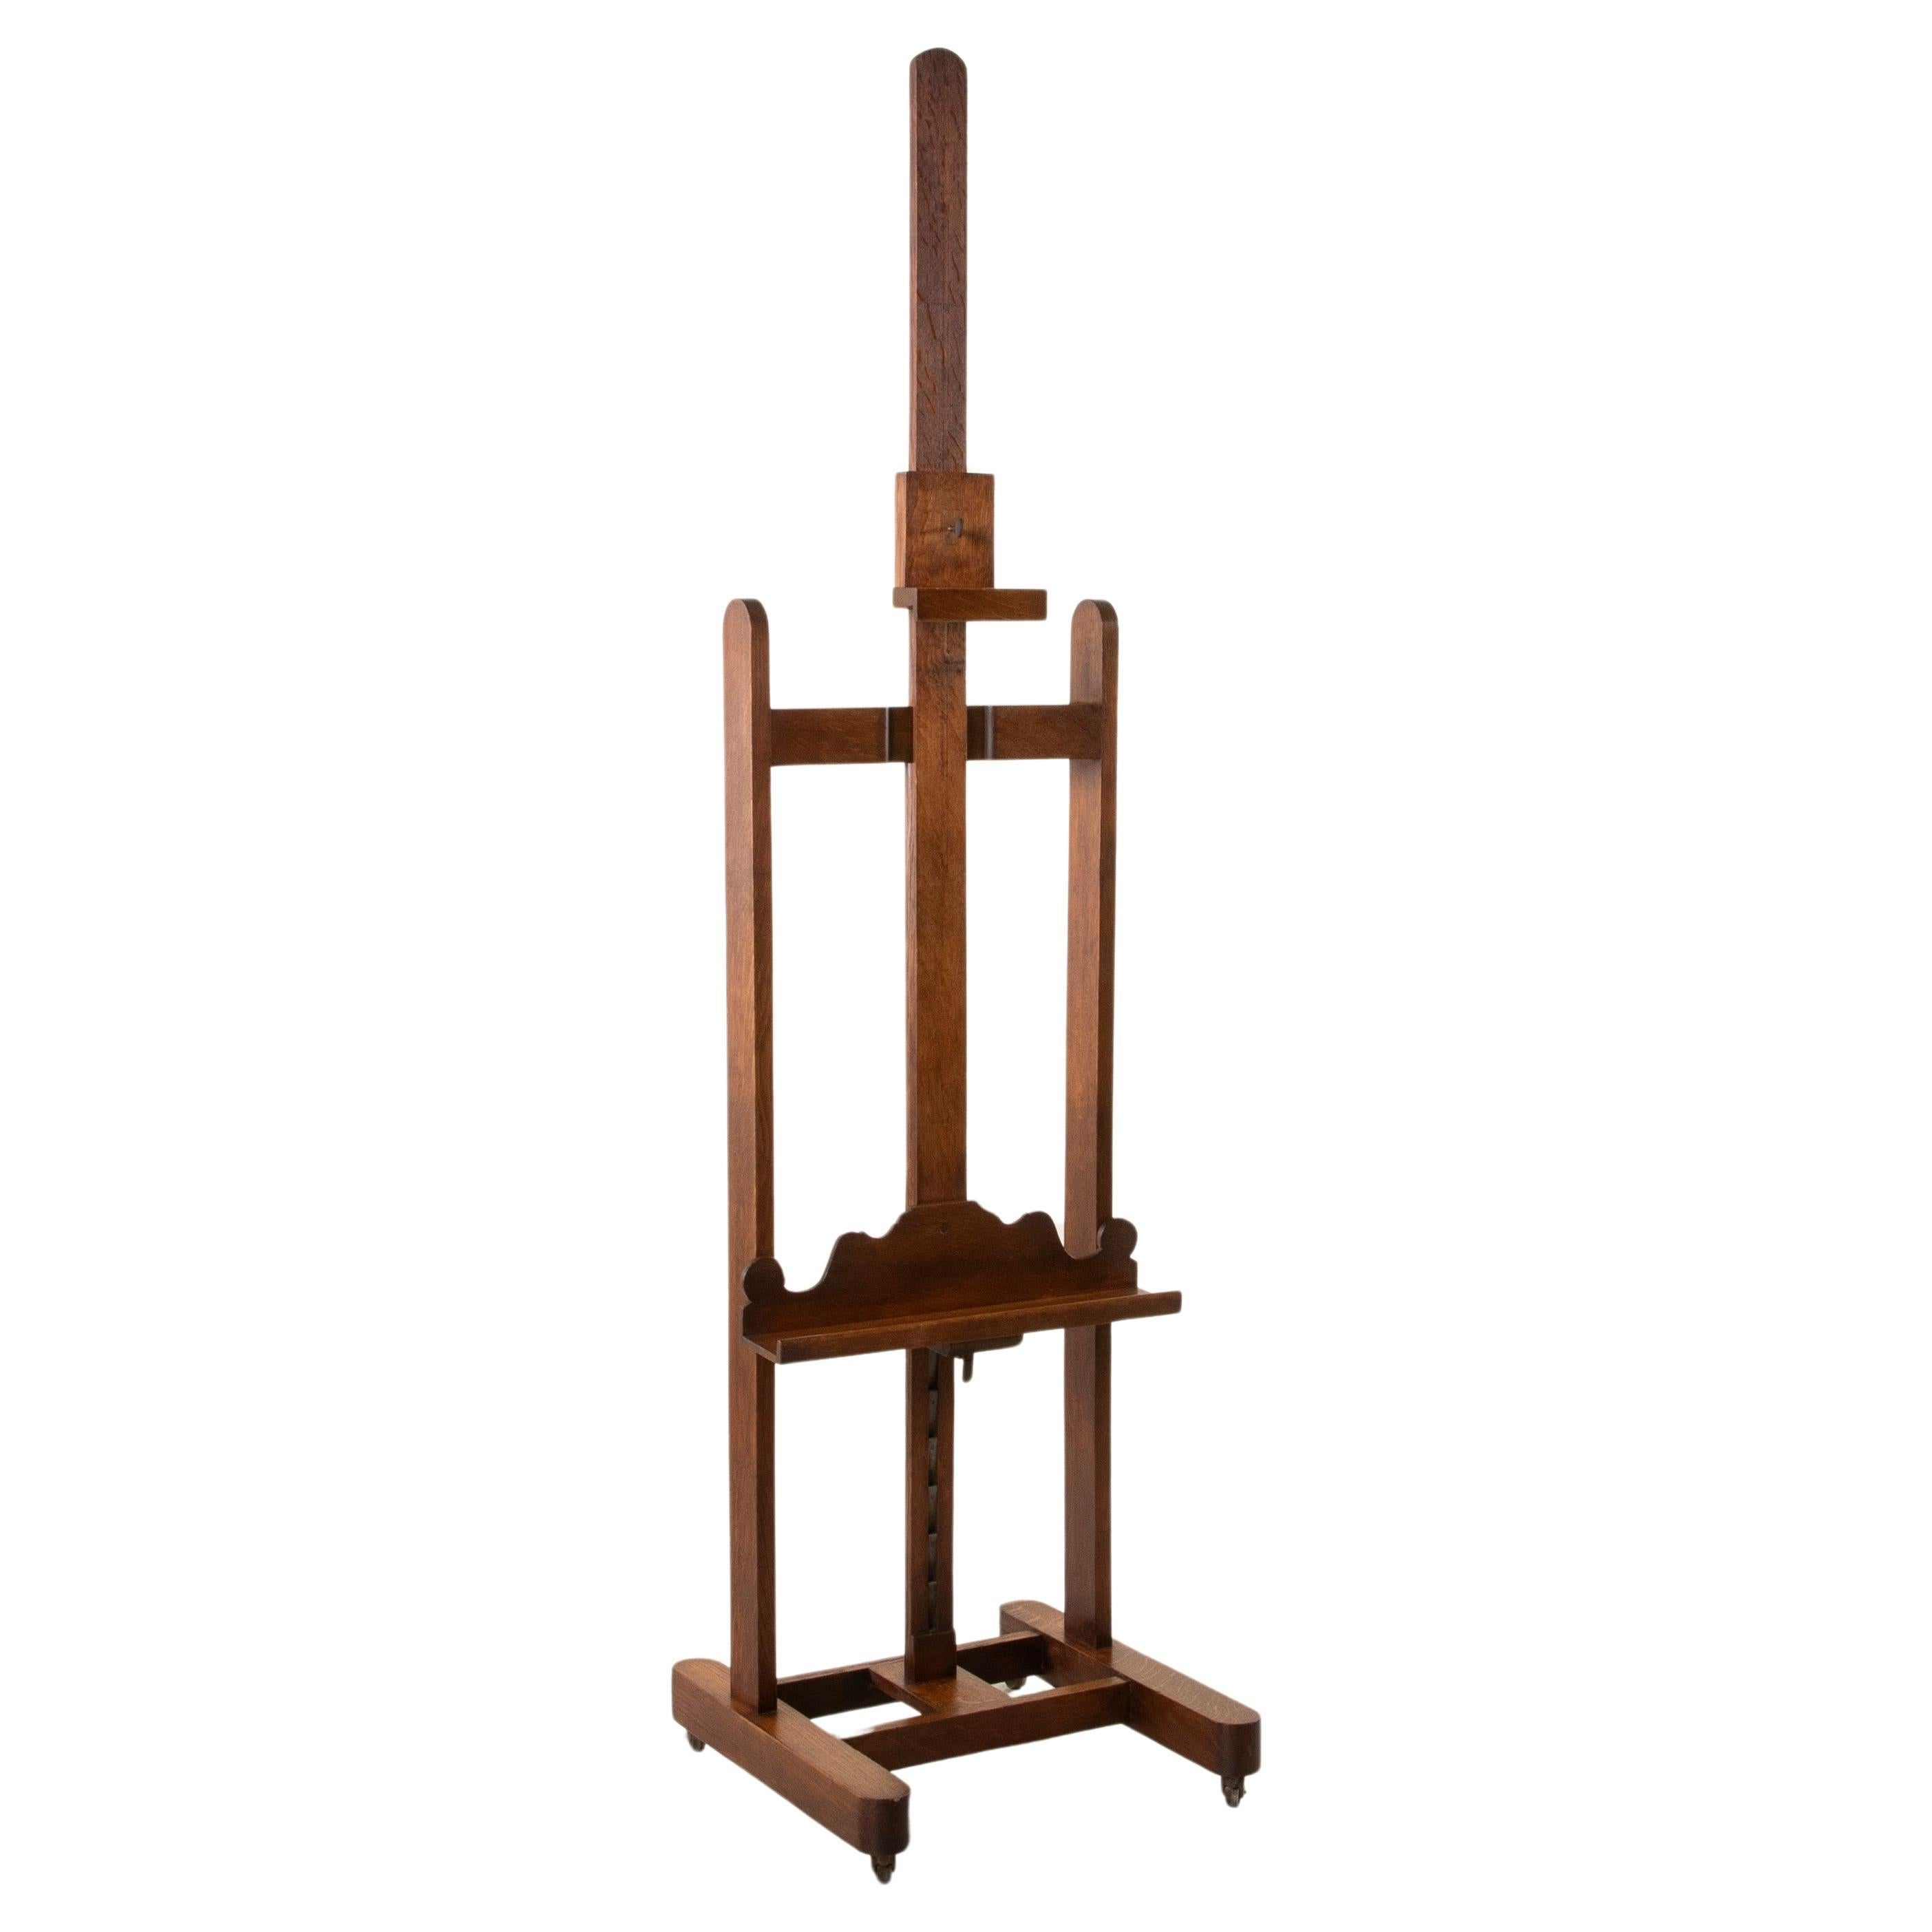 French Oak Floor Easel with Adjustable Height, C. 1900